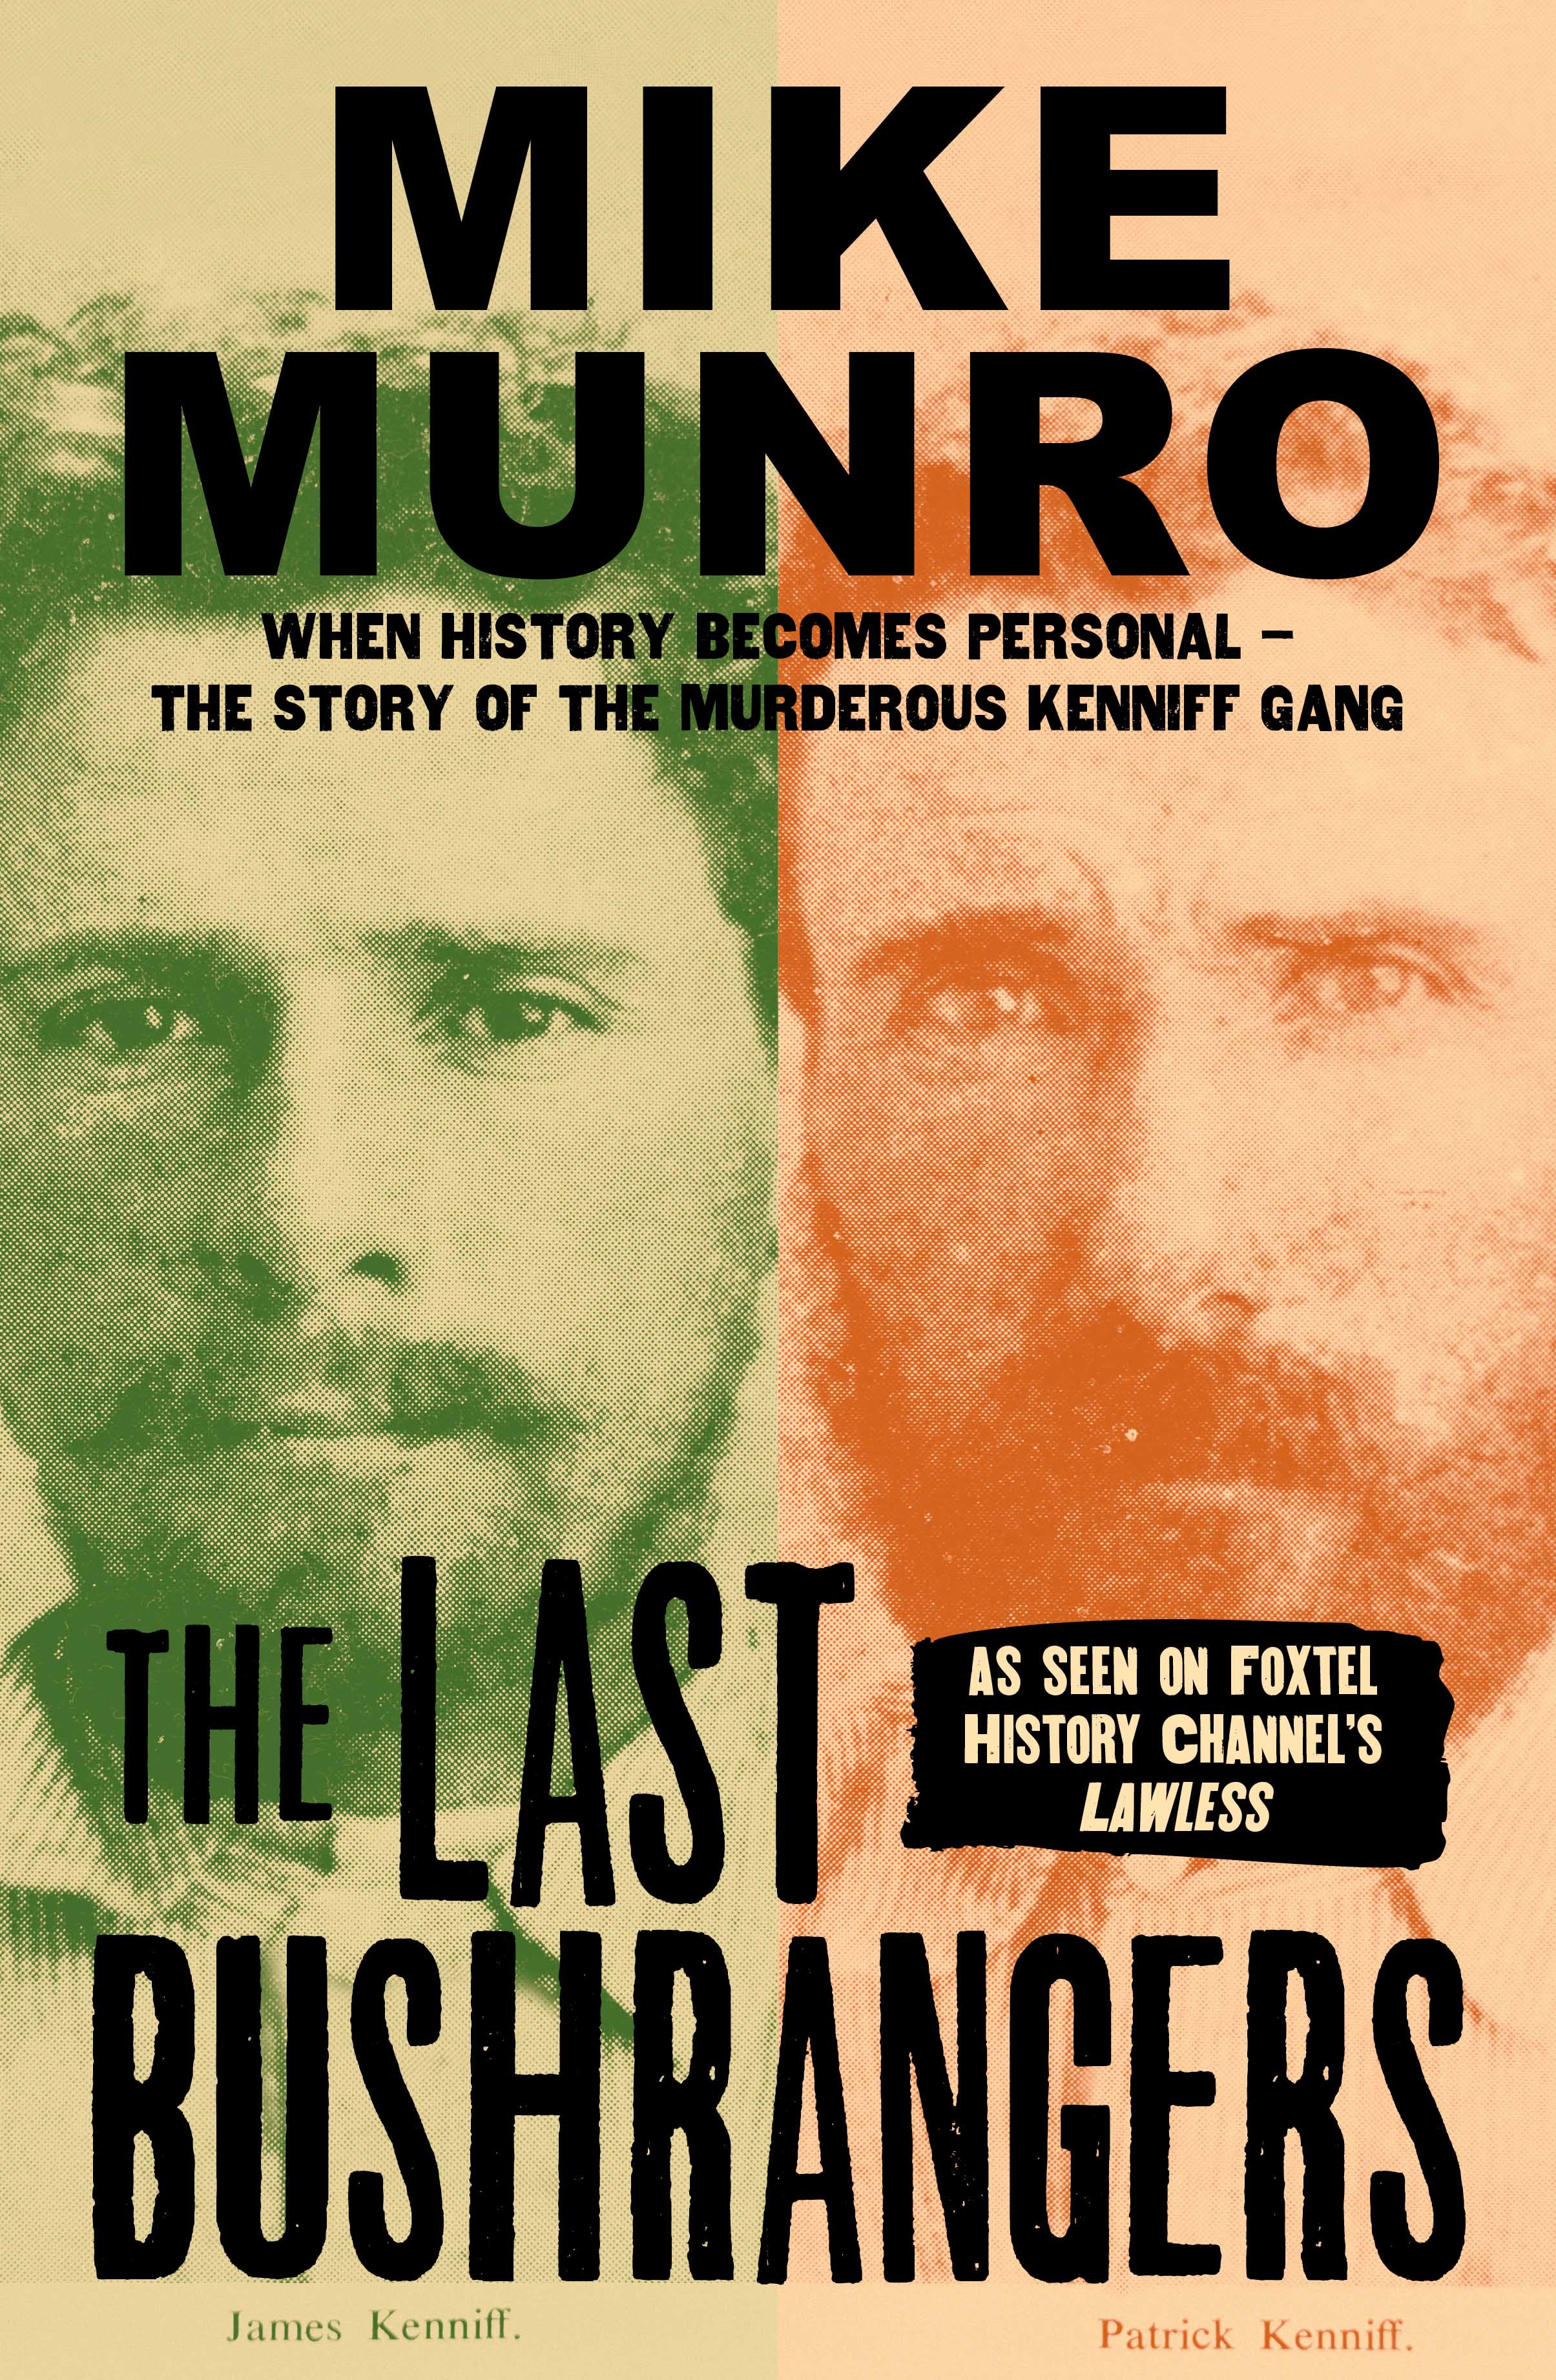  The last of the bushrangers: When the past got personal for Mike Munro